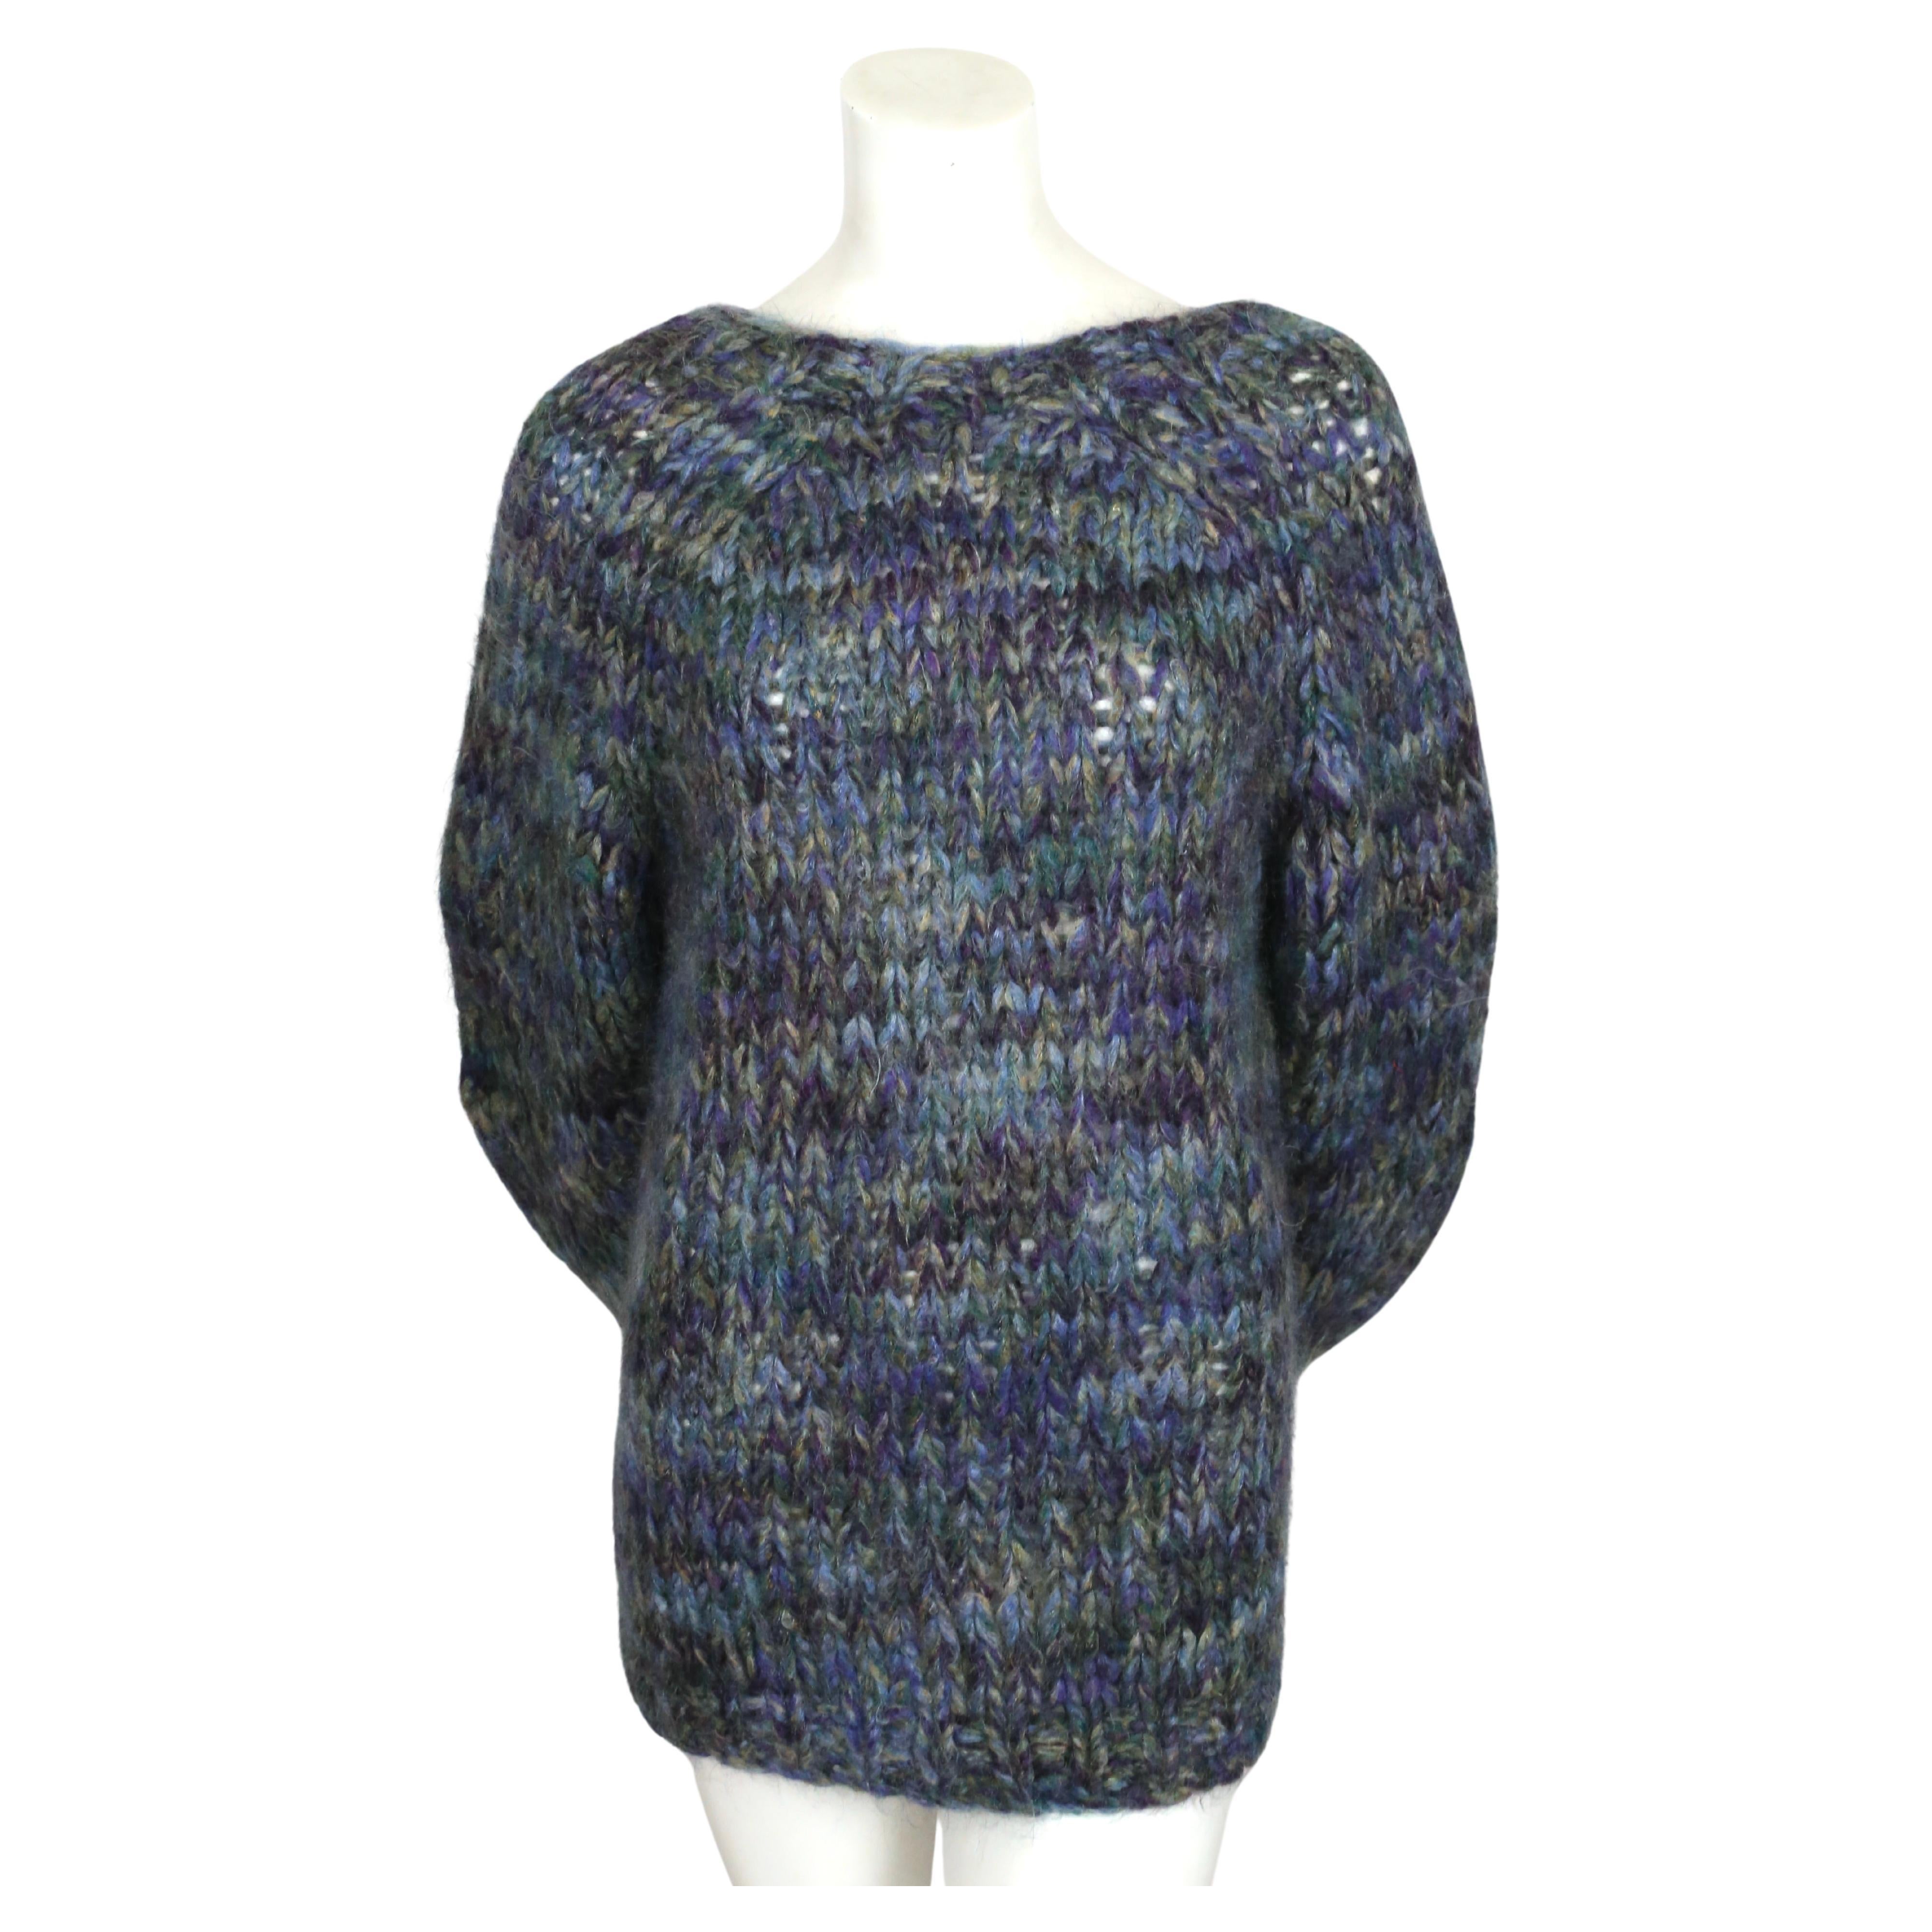 Blue and green fuzzy oversized sweater with bell sleeves and V-back by Dries Van Noten dating to the 2000's.   Size XS. Very oversized fit. Sweater has a loose weave with a heavy gauge knit however the fabric is soft and light.  Fabric content: 43%